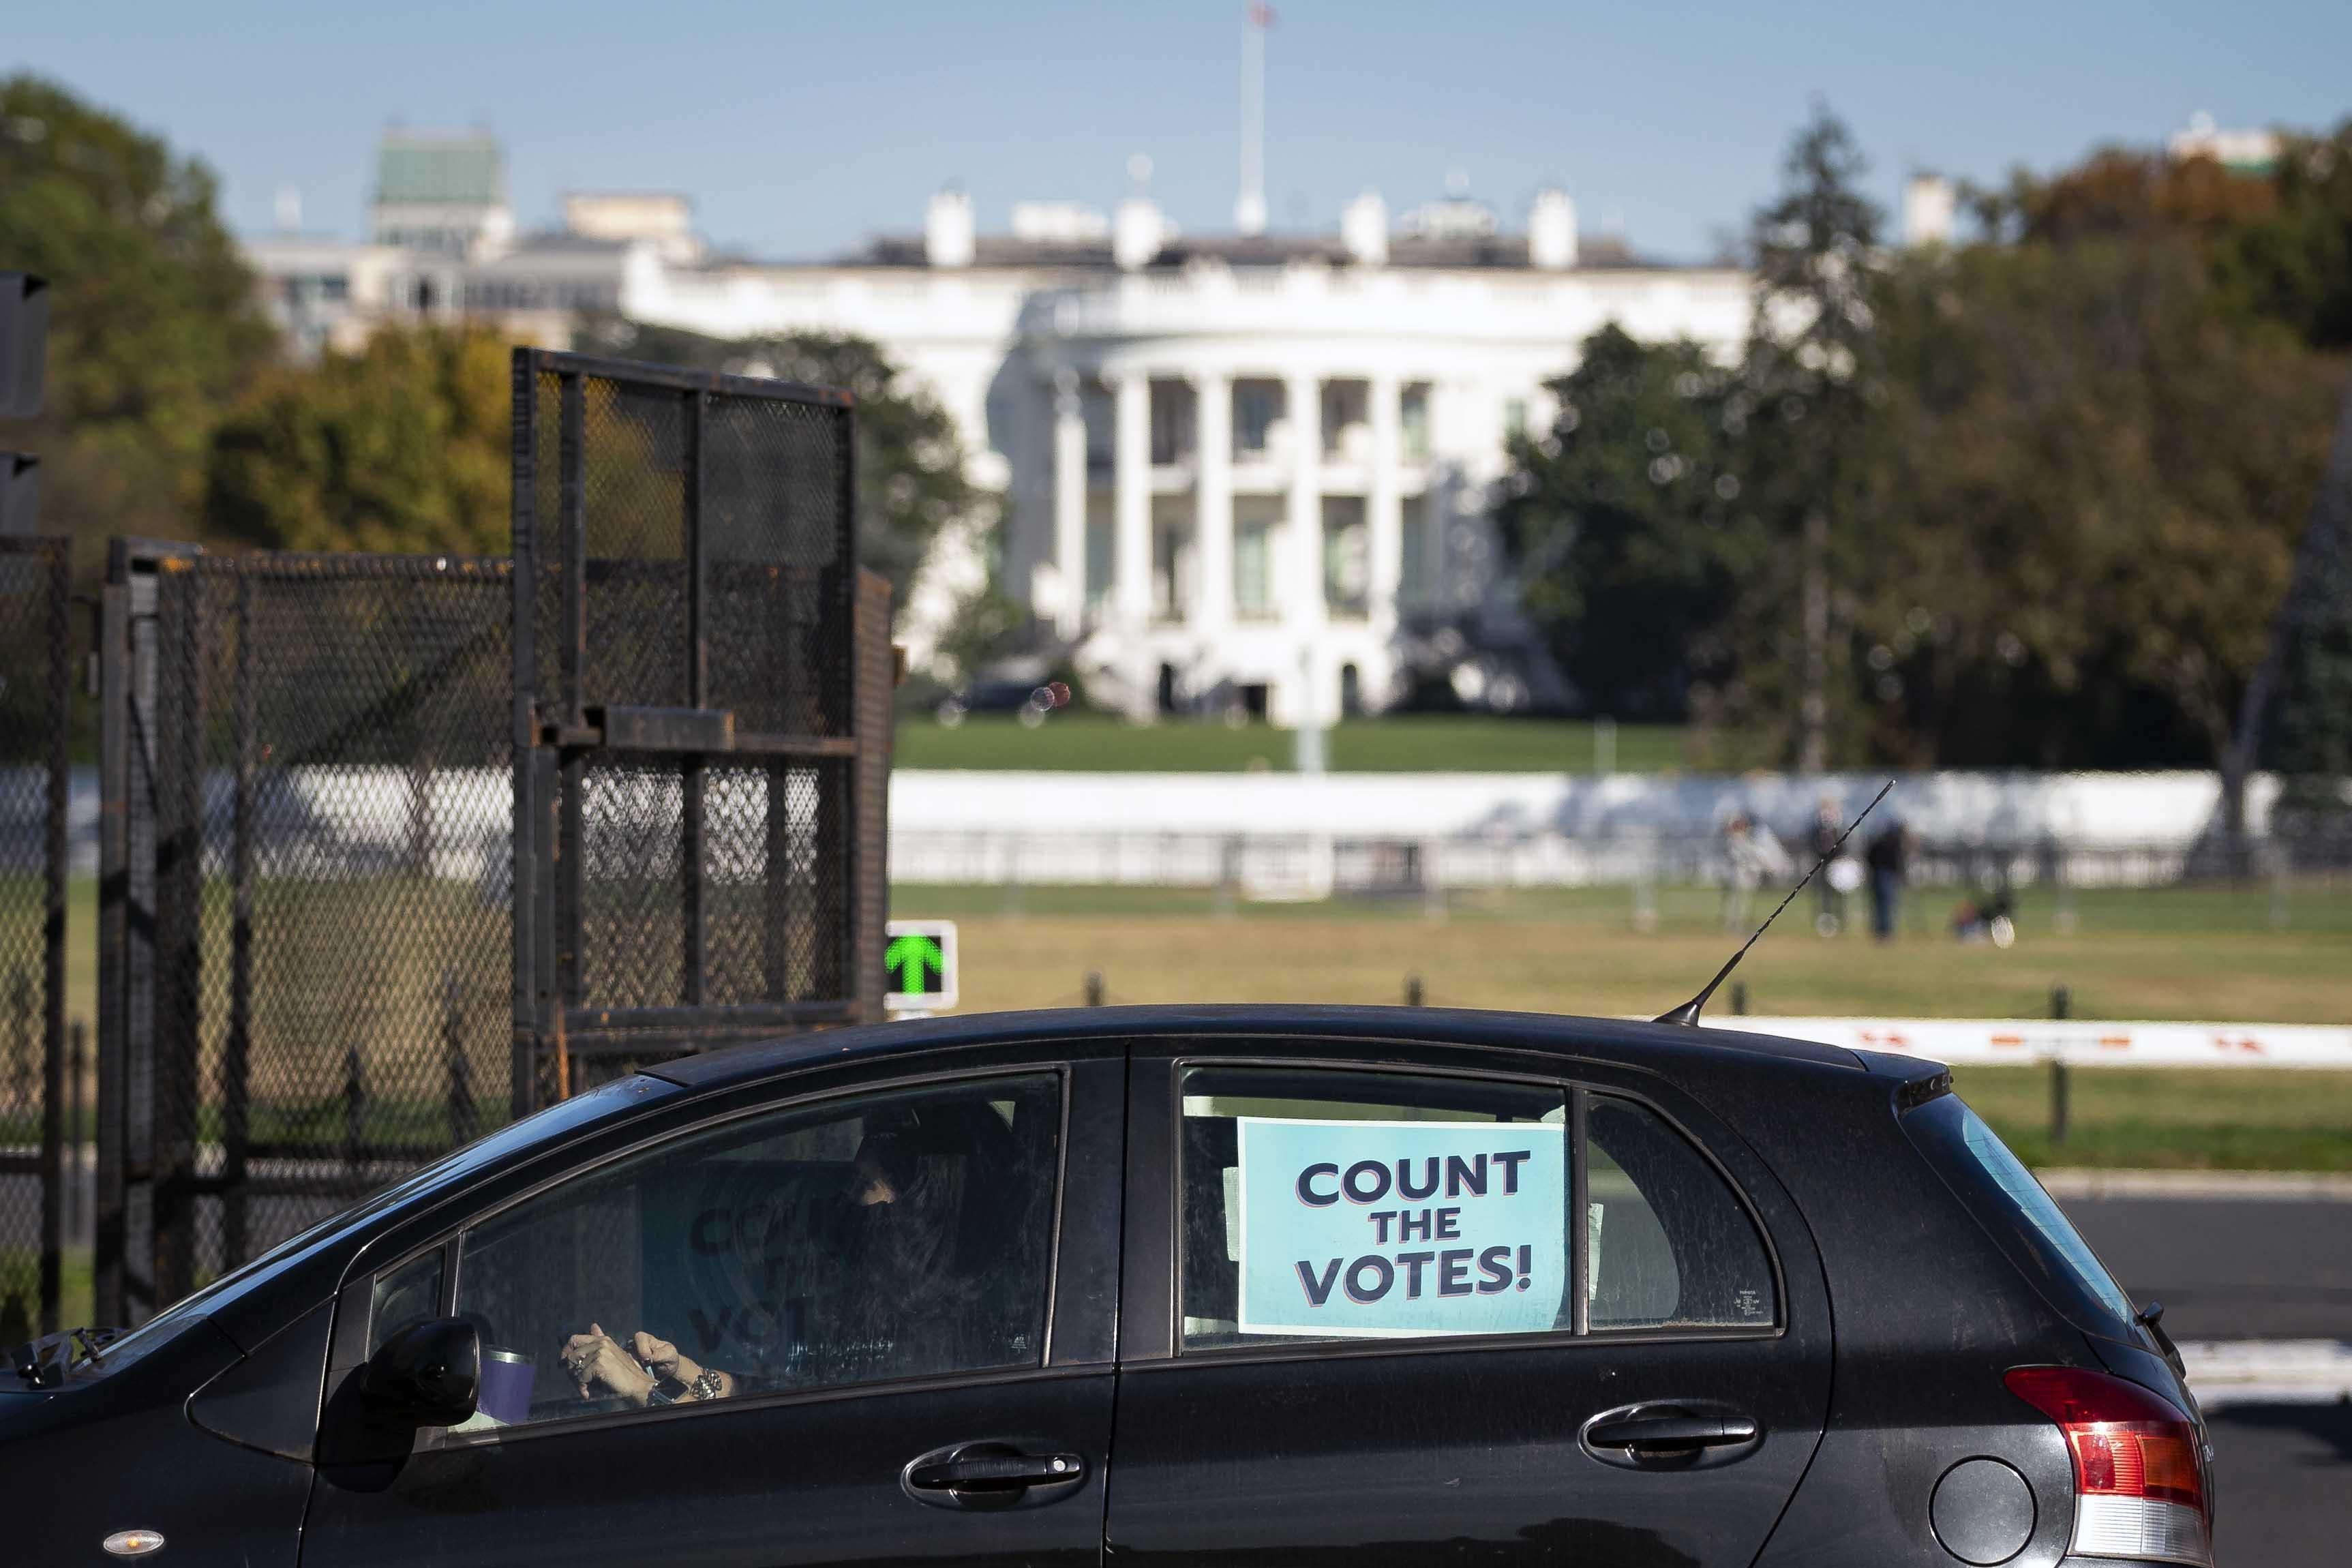 A van with a sign "Count the Votes" posted on the window is parked outside of the White House gate.